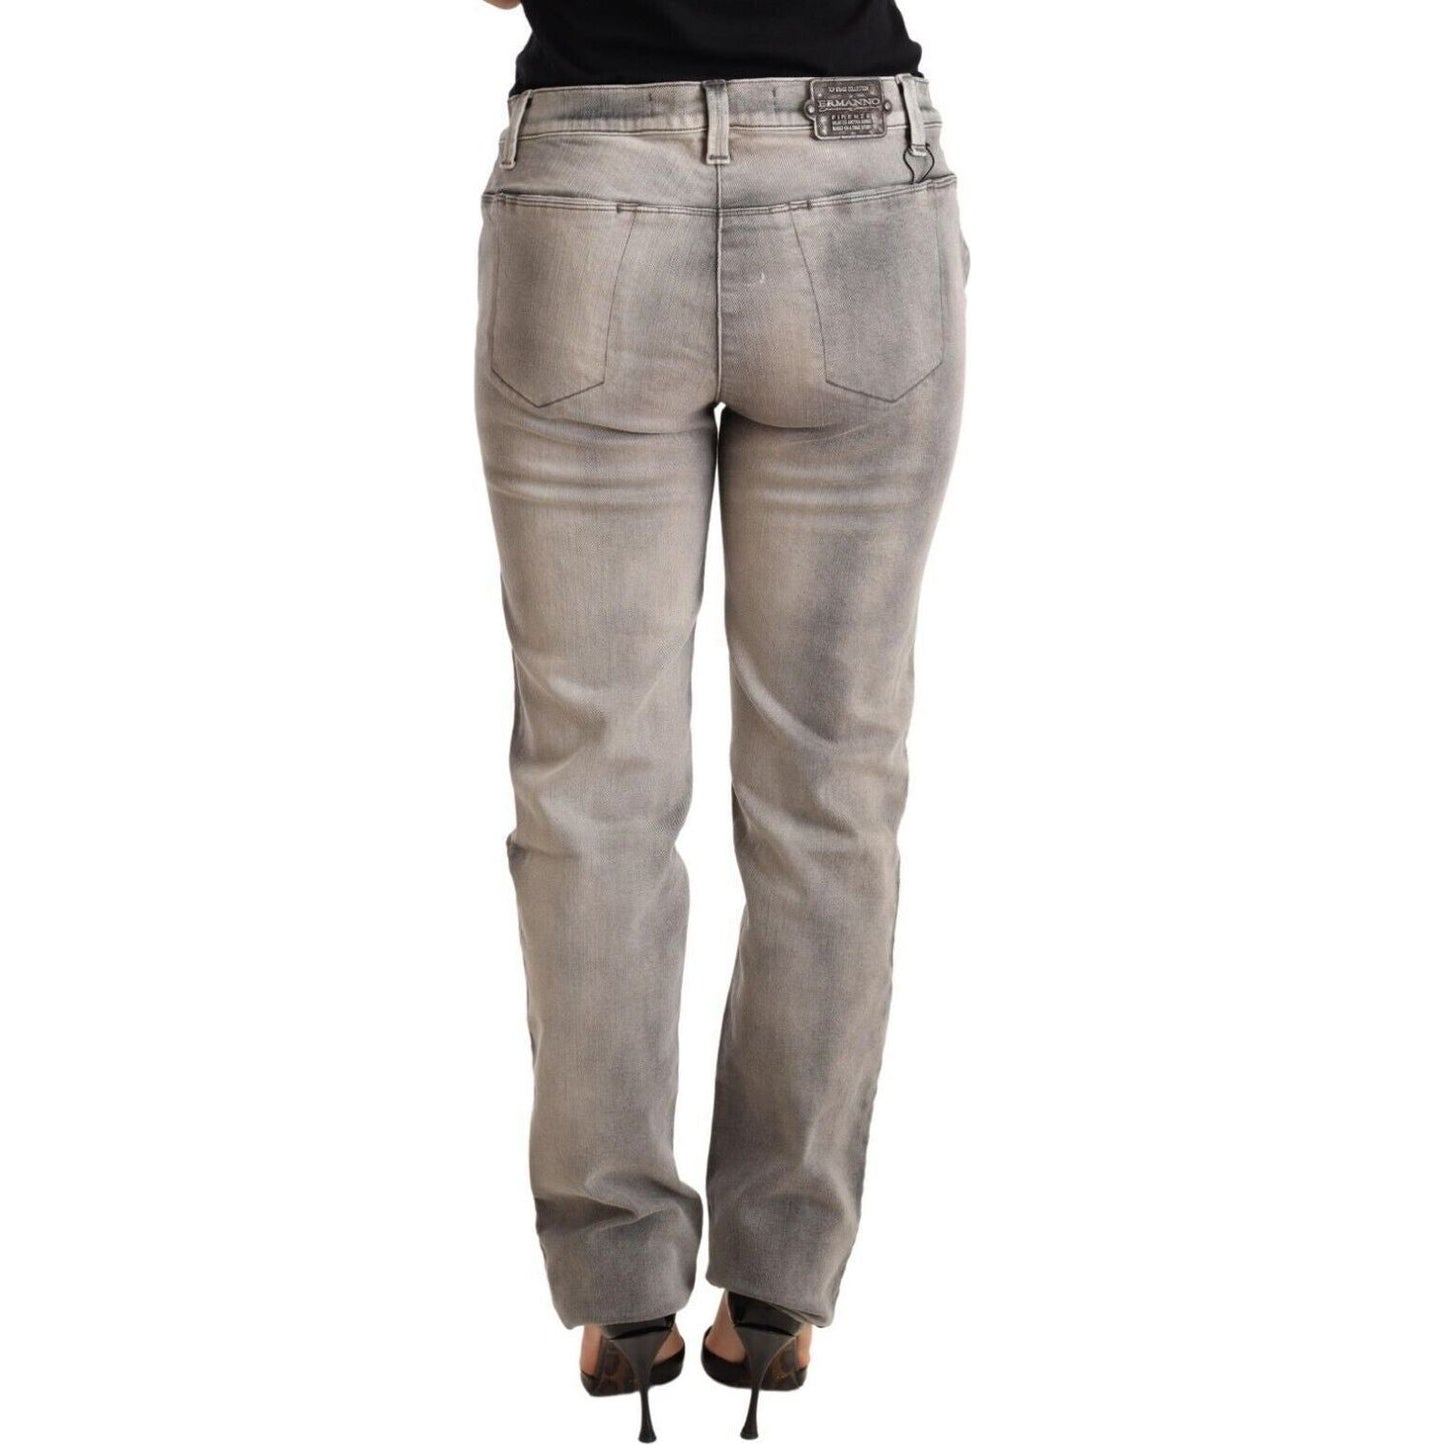 Ermanno Scervino Chic Gray Washed Low Waist Skinny Jeans Jeans & Pants gray-washed-low-waist-skinny-trouser-cotton-jeans